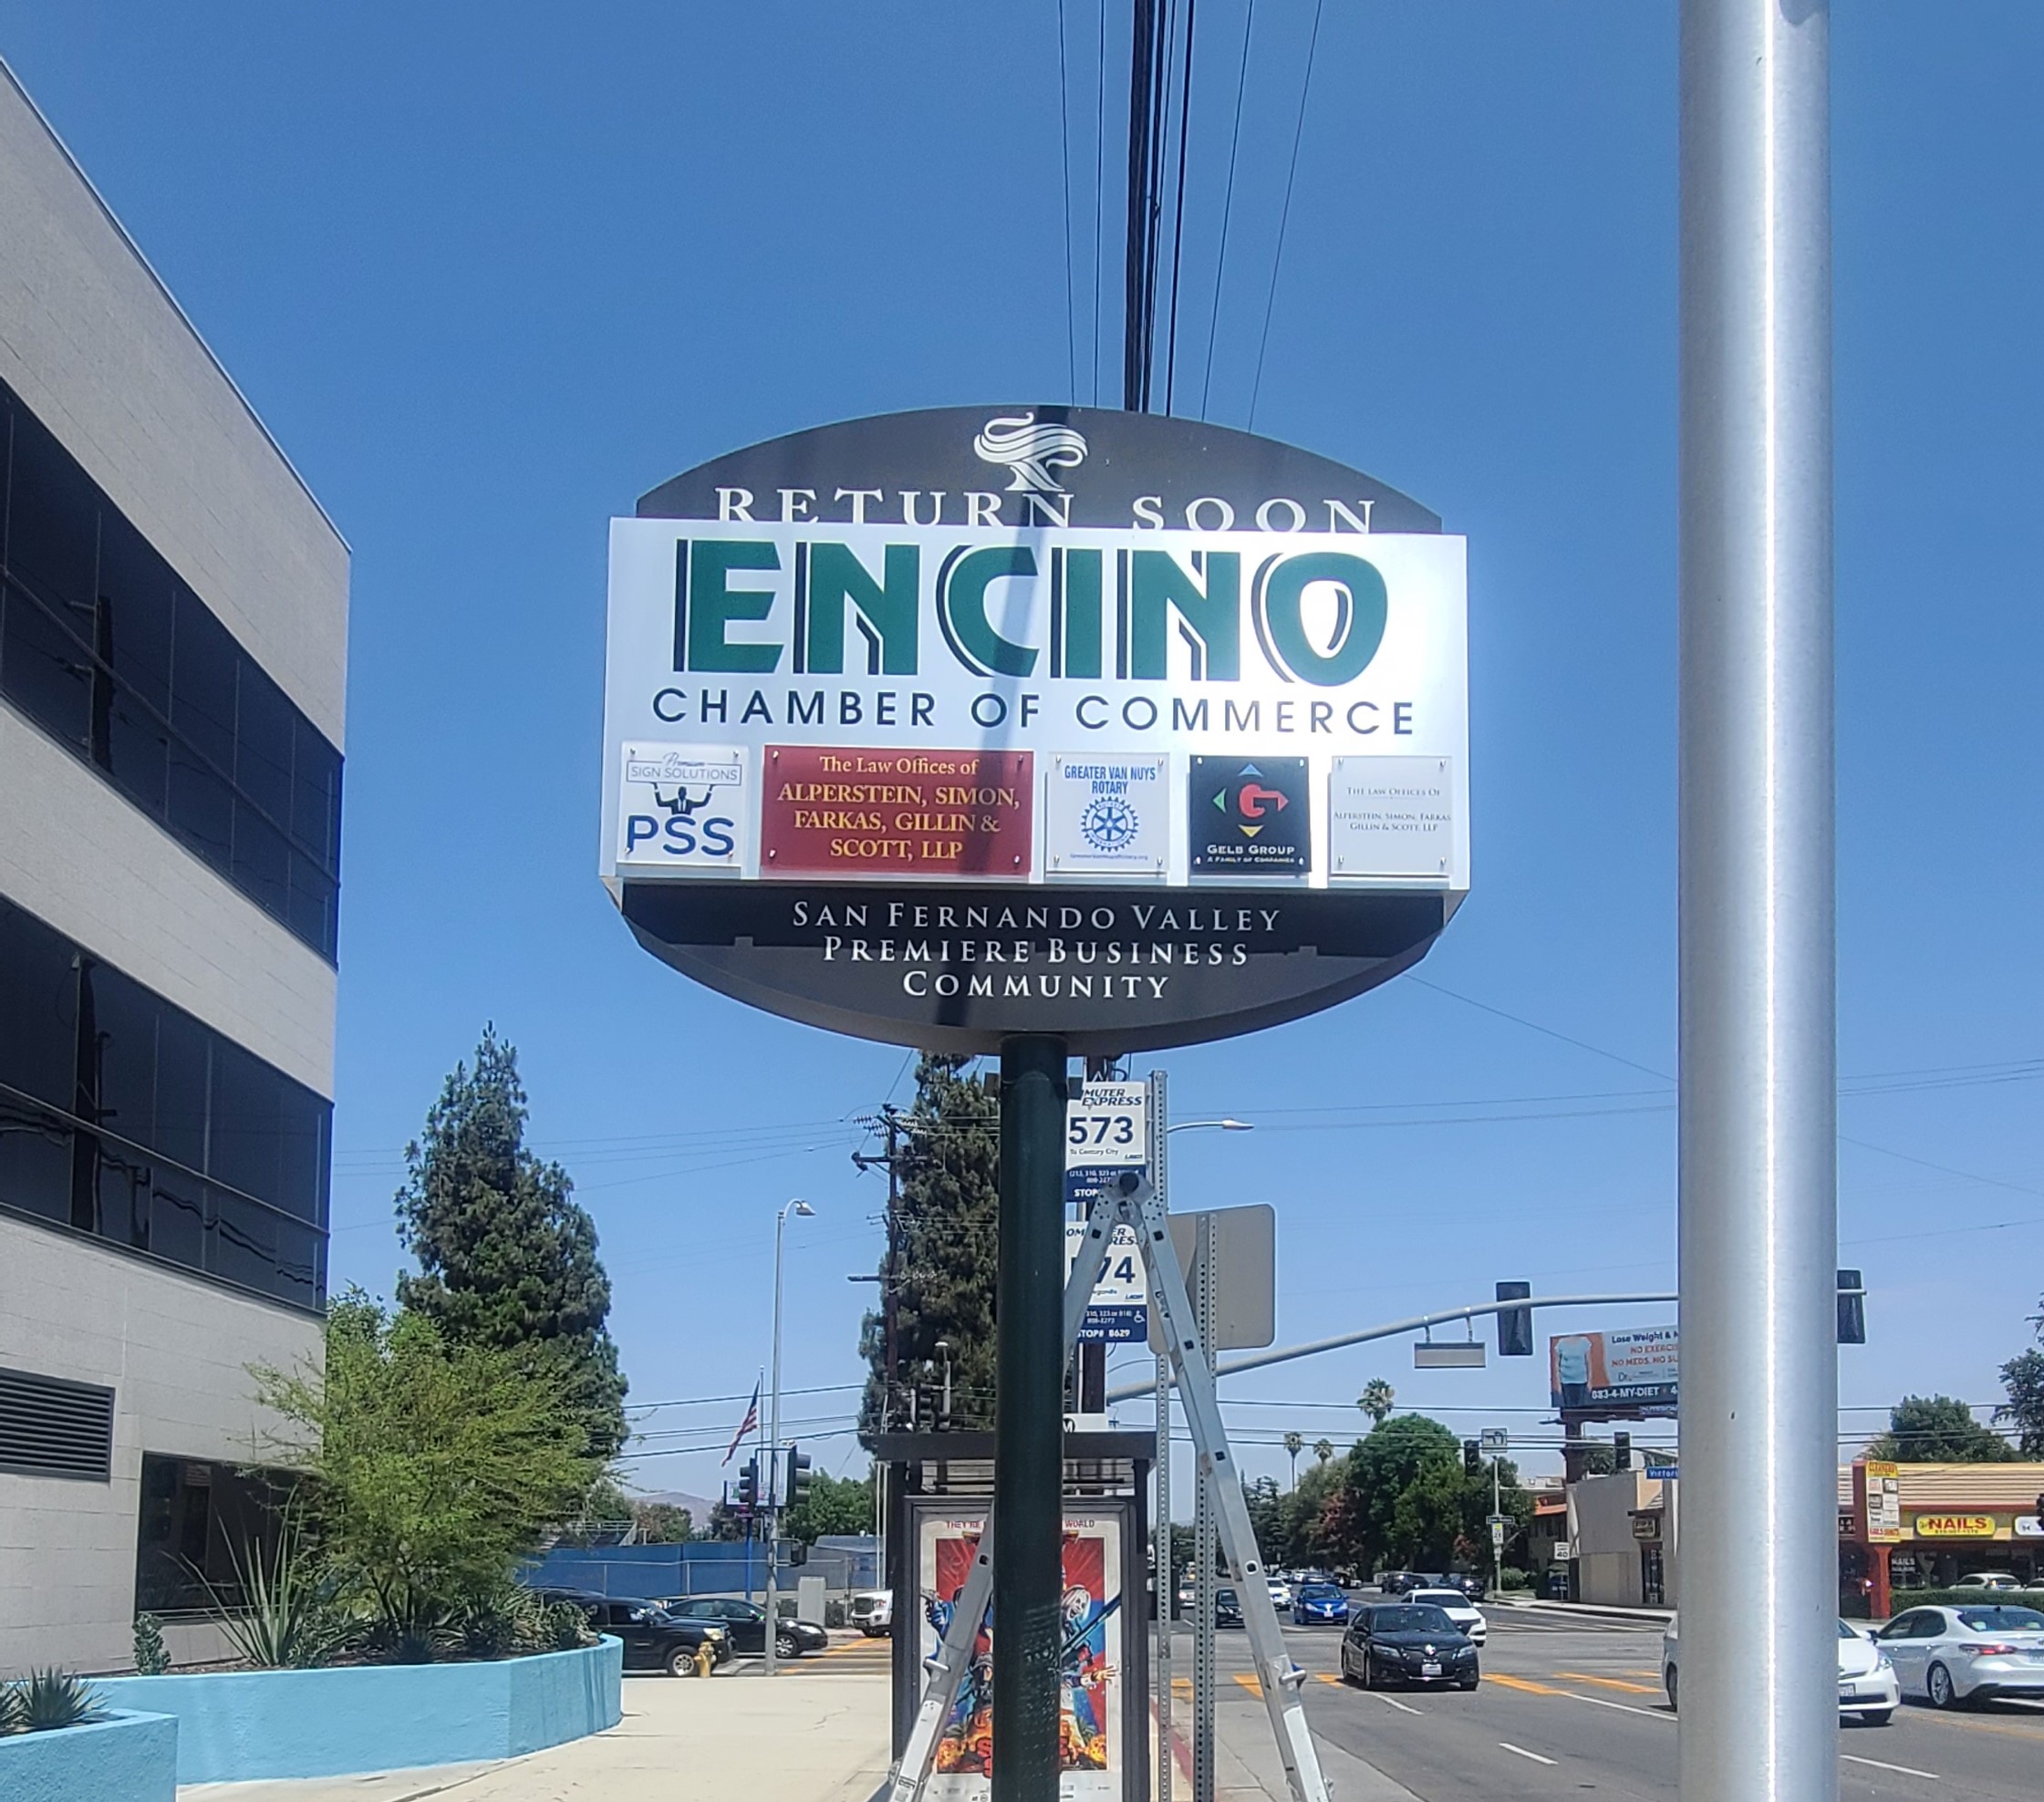 Communities can greet visitors and residents alike with a welcome sign or two, like this acrylic plaque we fabricated and installed for the Encino Chamber of Commerce.